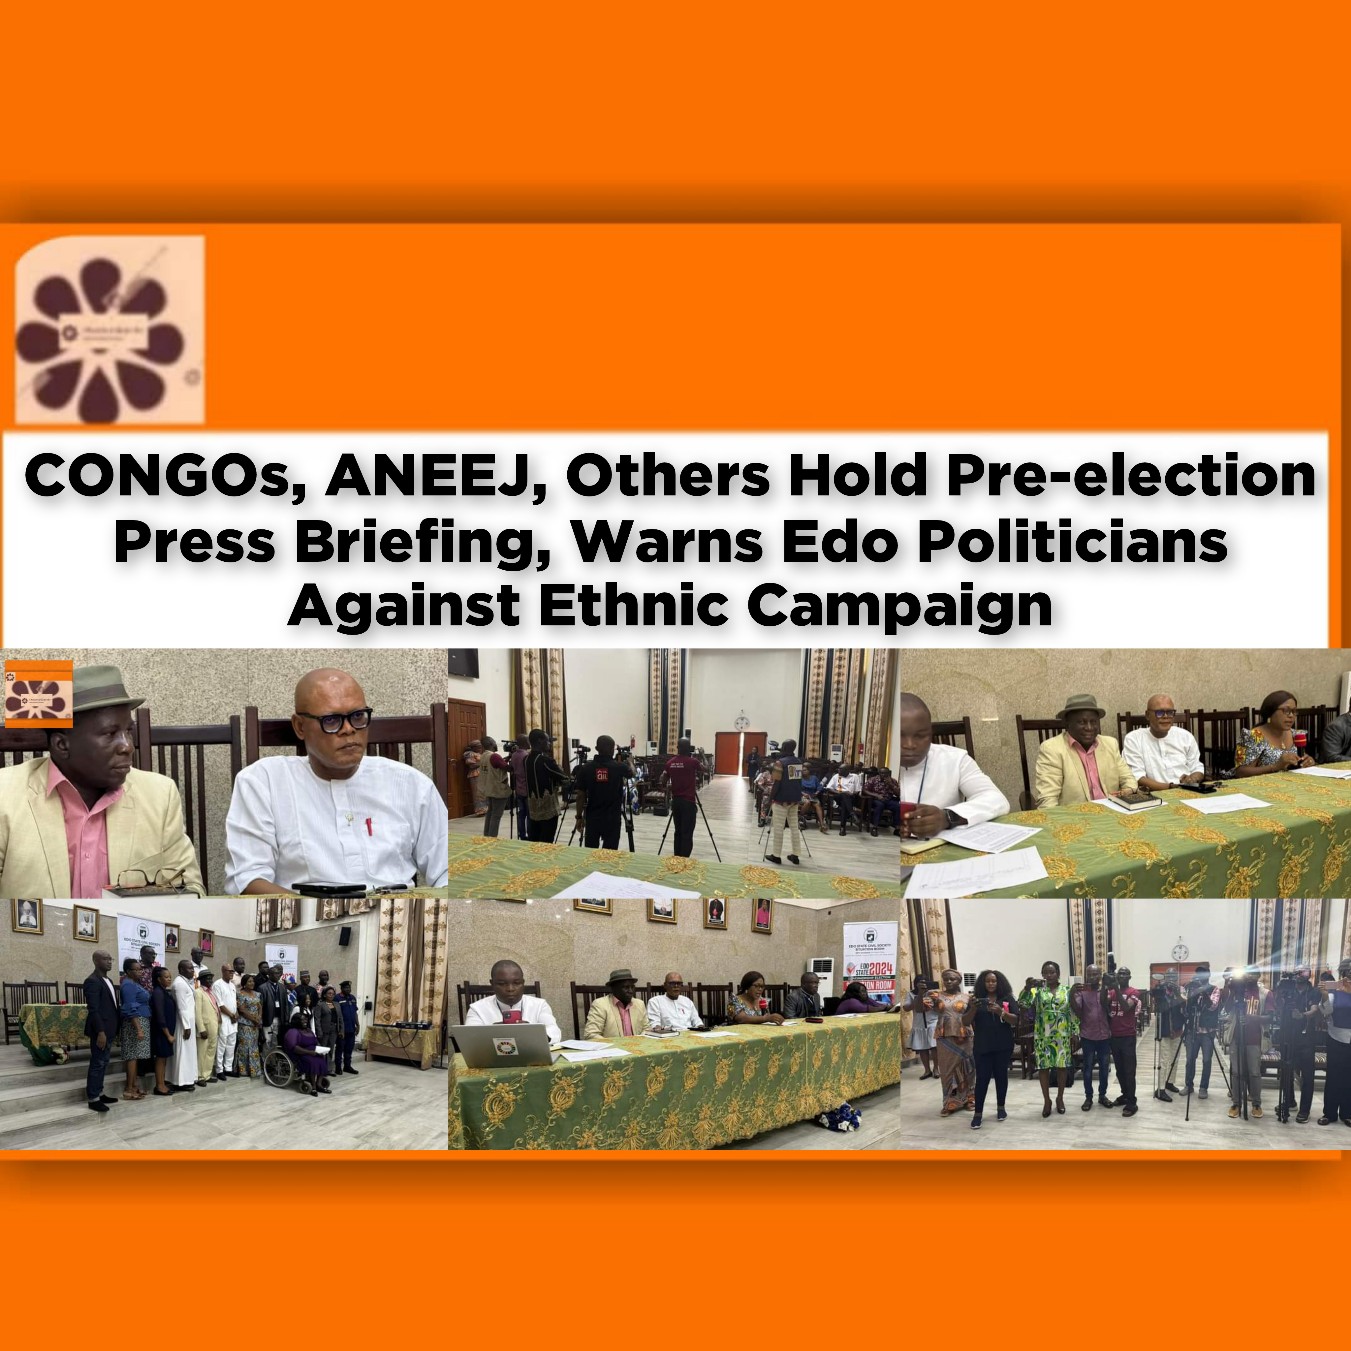 CONGOs, ANEEJ, Others Hold Pre-election Press Briefing, Warns Edo Politicians Against Ethnic Campaign ~ OsazuwaAkonedo #ANEEJ #CONGOs #edo #election #Ethnic #INEC #NGOs